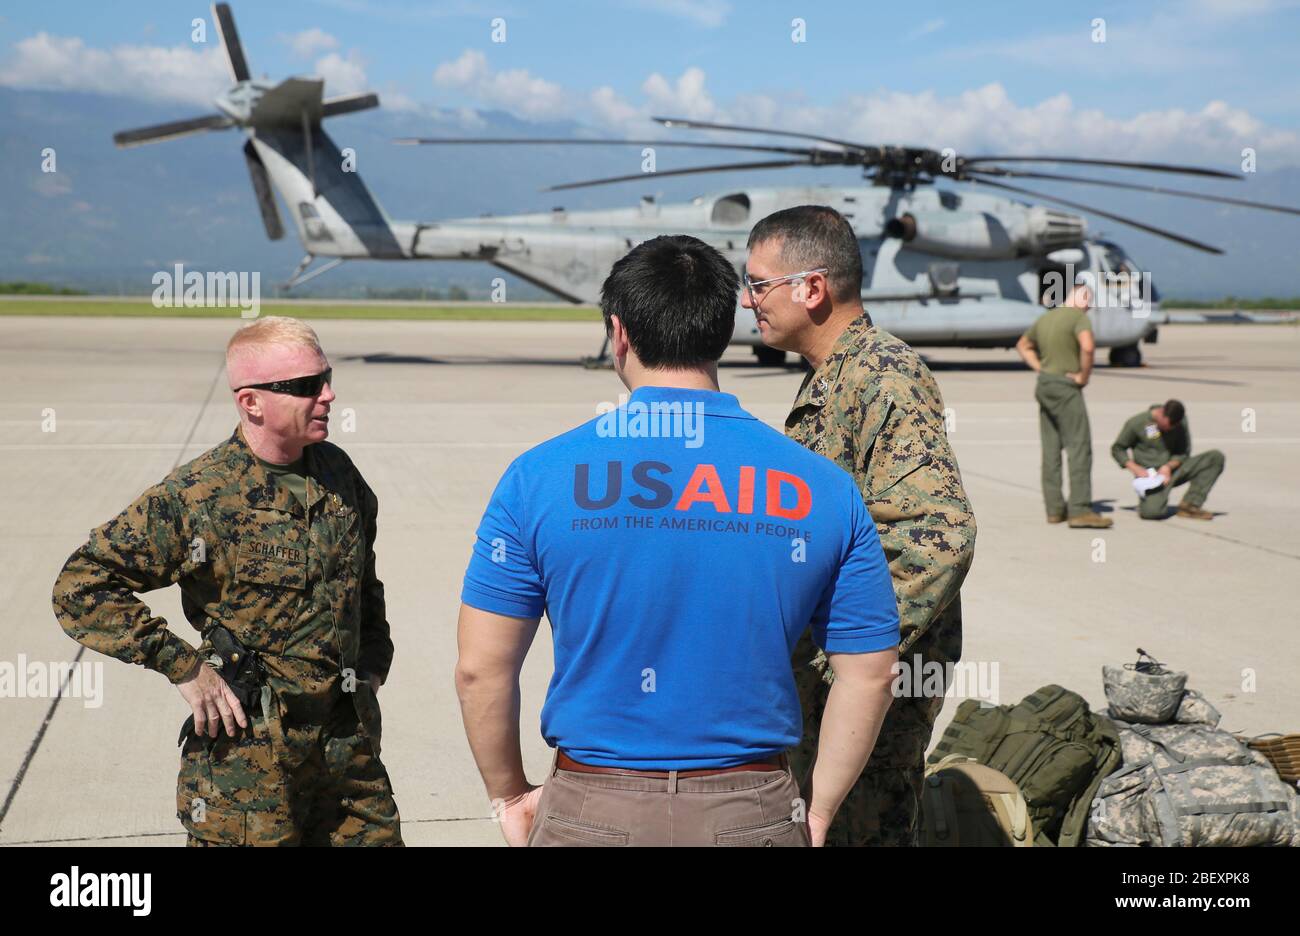 SOTO CANO AIR BASE, Honduras (Oct. 4, 2016) Sgt. Major Wesley L. Schaffer (right), Marine Air-Ground Task Force Southern Command Sgt Major, Albert Gembara (center), U.S Agency for International Development/Office of U.S Foreign Disaster Assistance humanitarian assistance advisor and Col. Thomas E. Prentice (left), Special Purpose Marine Air-Ground Task Force - Southern Command (SPMAGTF-SC) commanding officer speak prior to embarking aboard CH-53E Super Stallion and depart to Grand Cayman Island at Soto Cano Air Base, Honduras. The SPMAGTF-SC is part of U.S southern Command response team staged Stock Photo